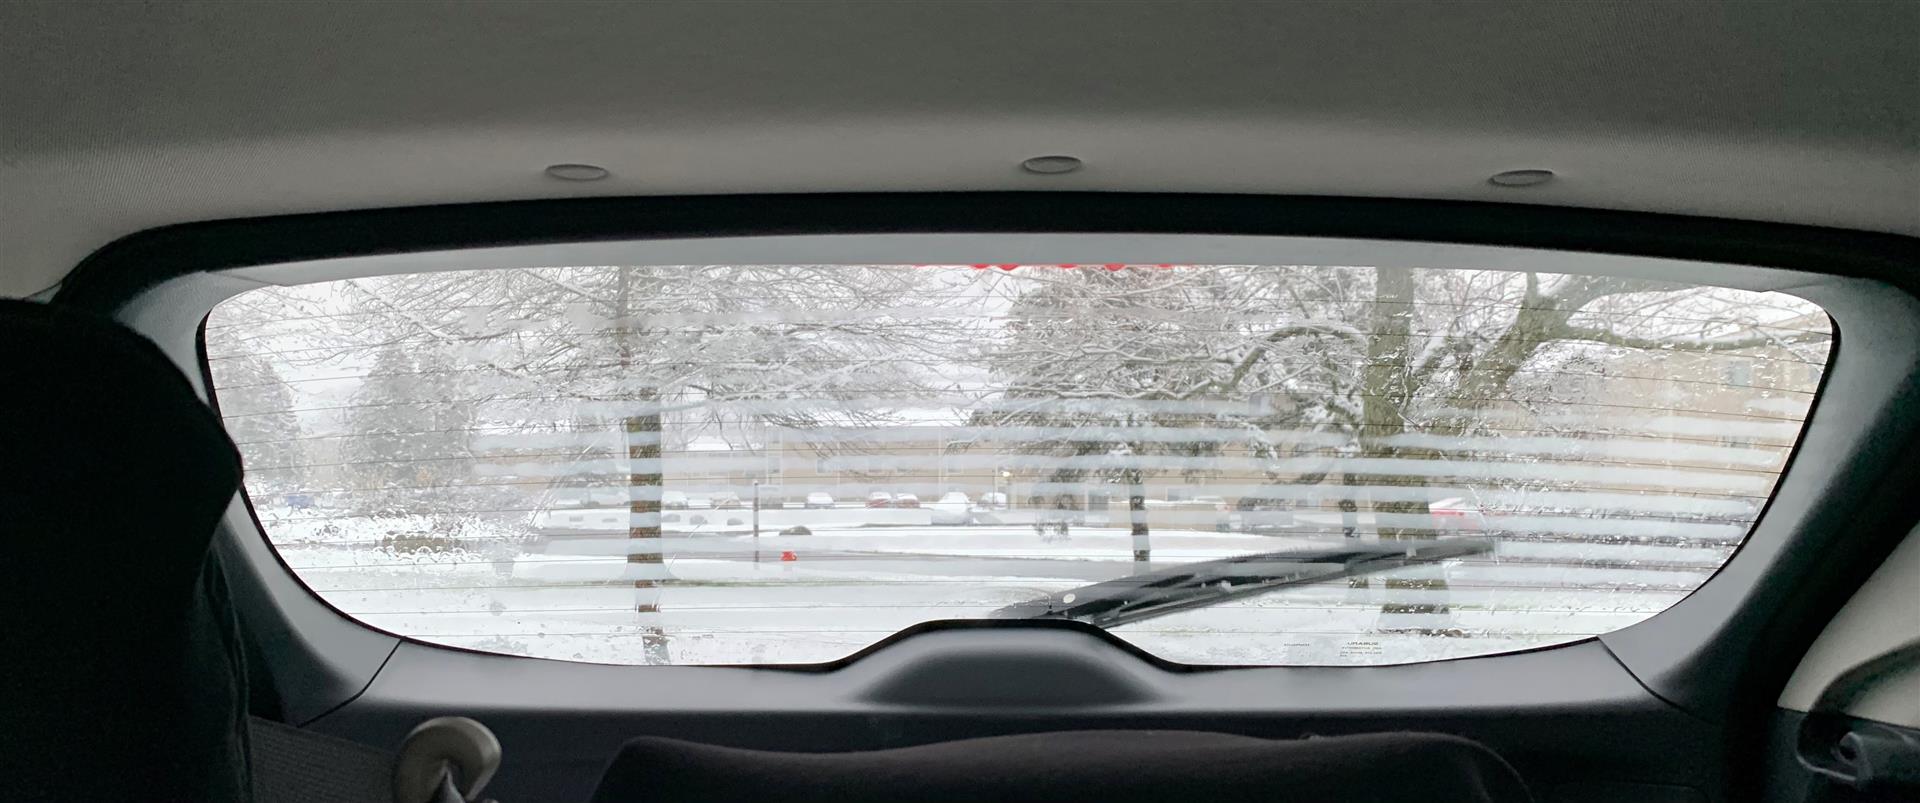 5 Reasons Your Car's Defrosters Stop Working